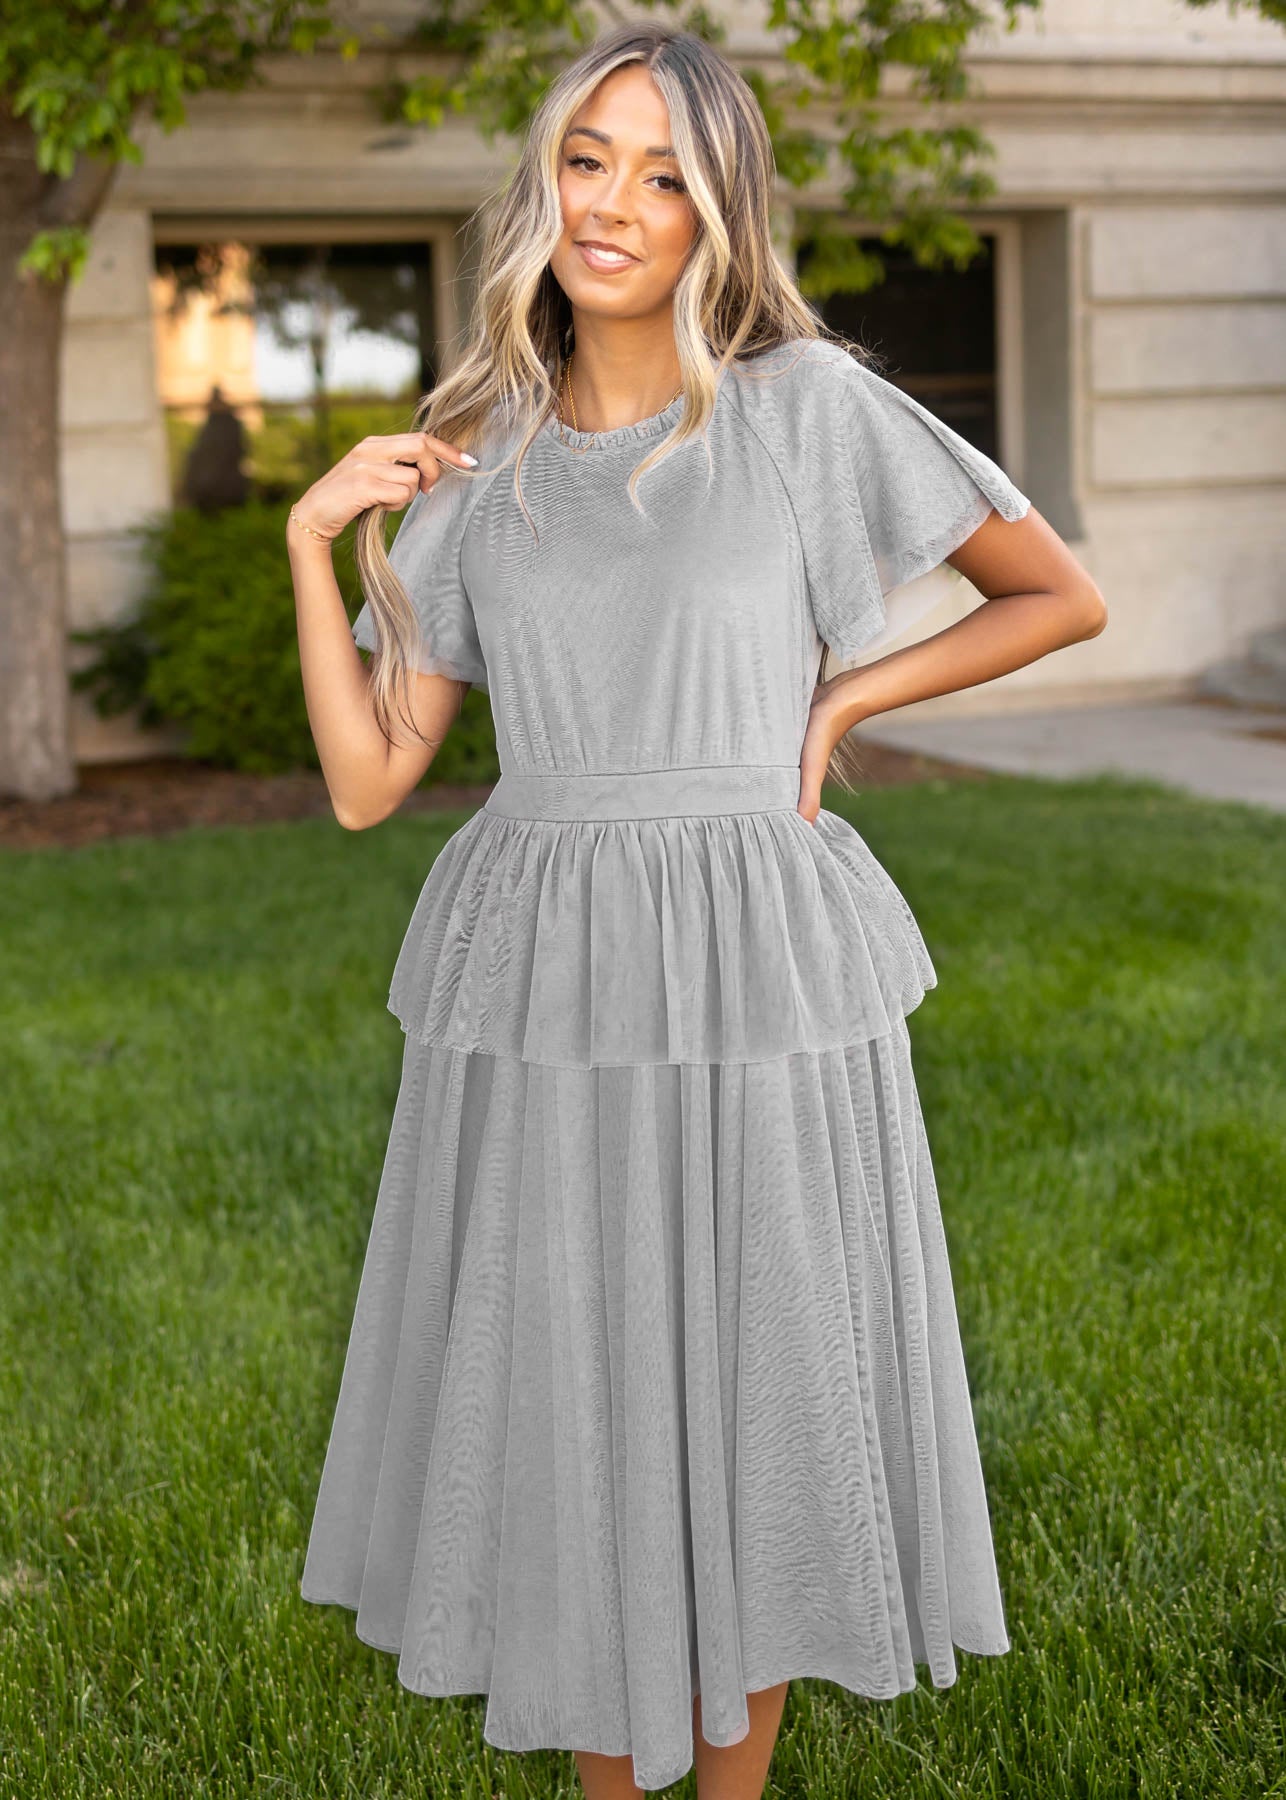 Gray dress with short sleeves and tier ruffle skirt